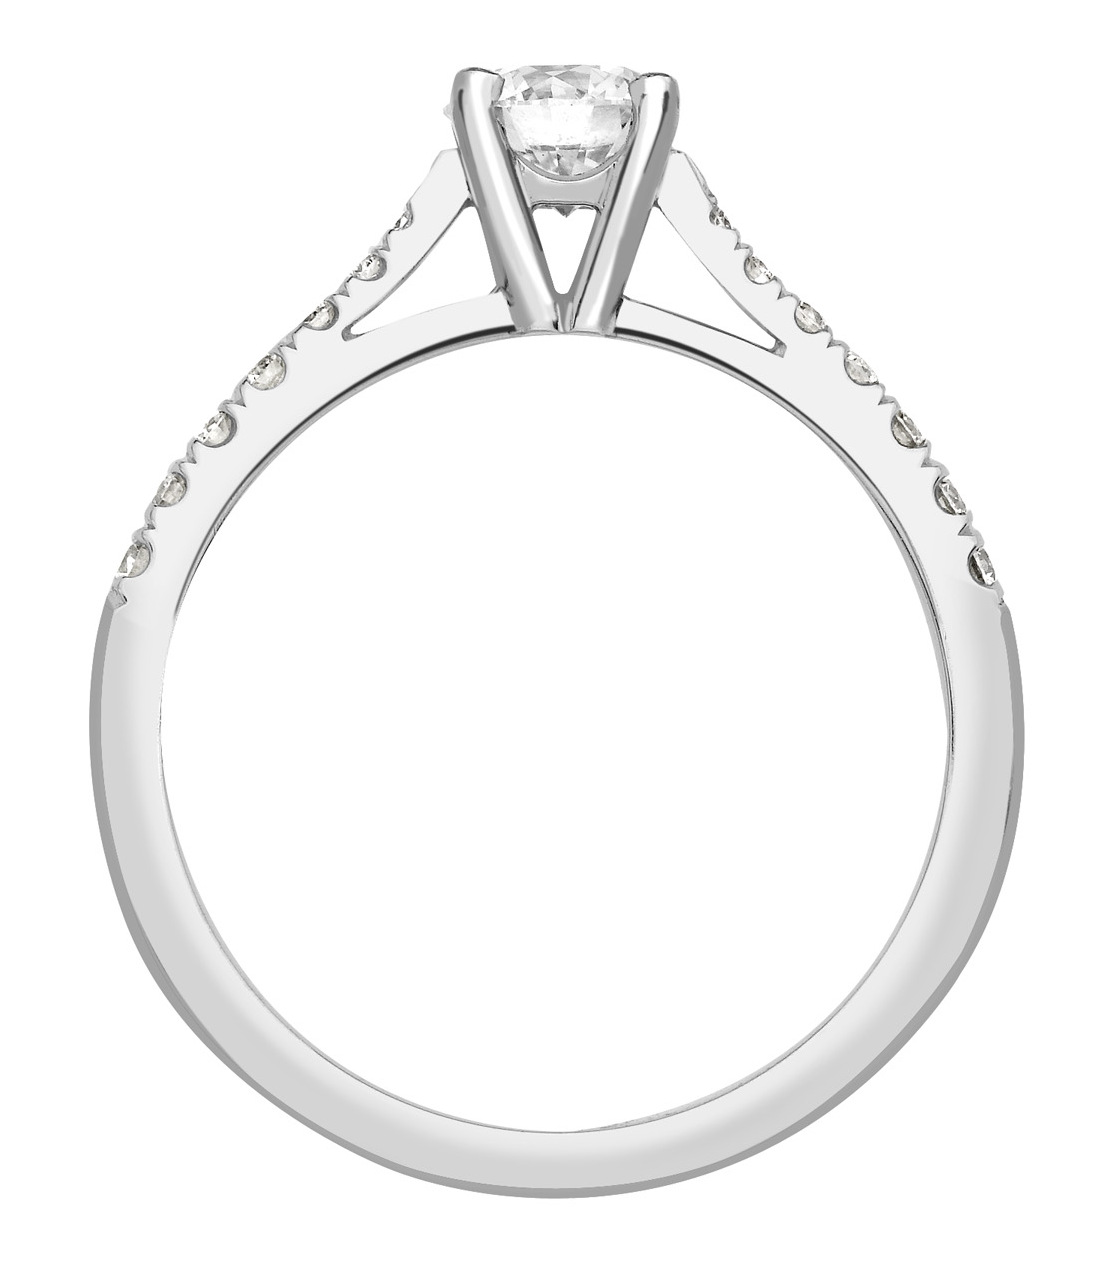 Round Four Claw Diamond Engagement Ring CRC762PLT Image 2